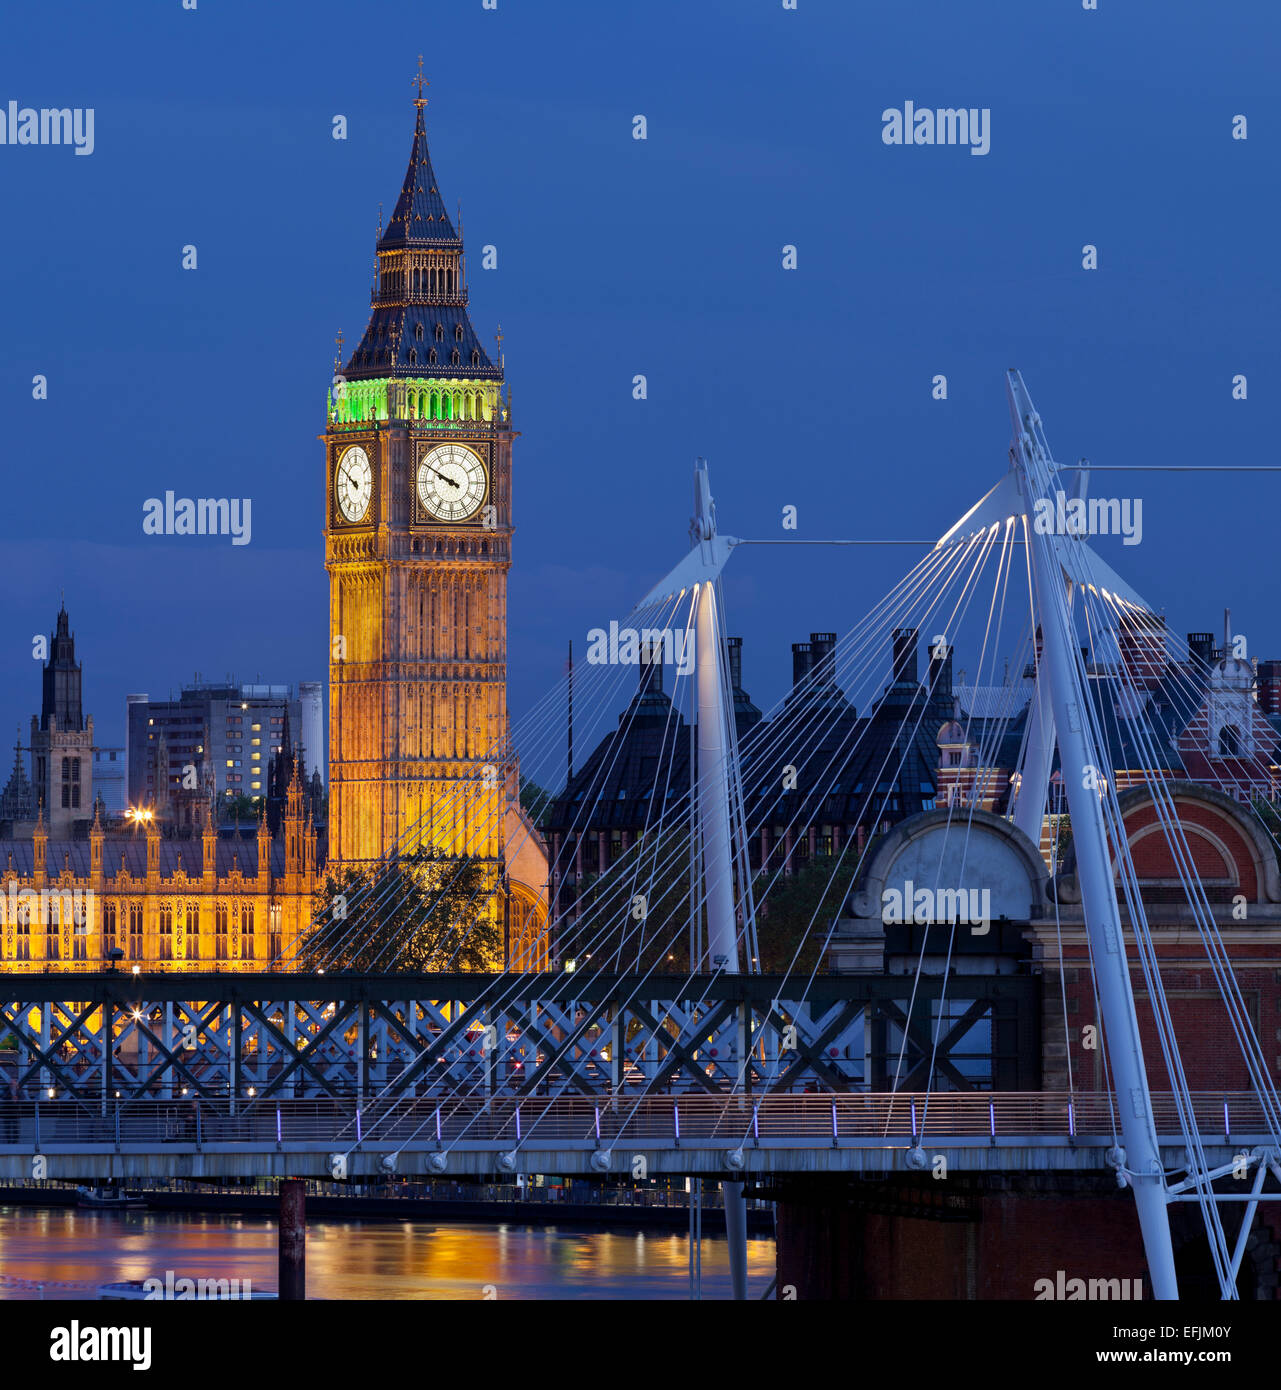 Westminster Palace and Big Ben with Hungerford Bridge at night, Charing Cross, London, England Stock Photo